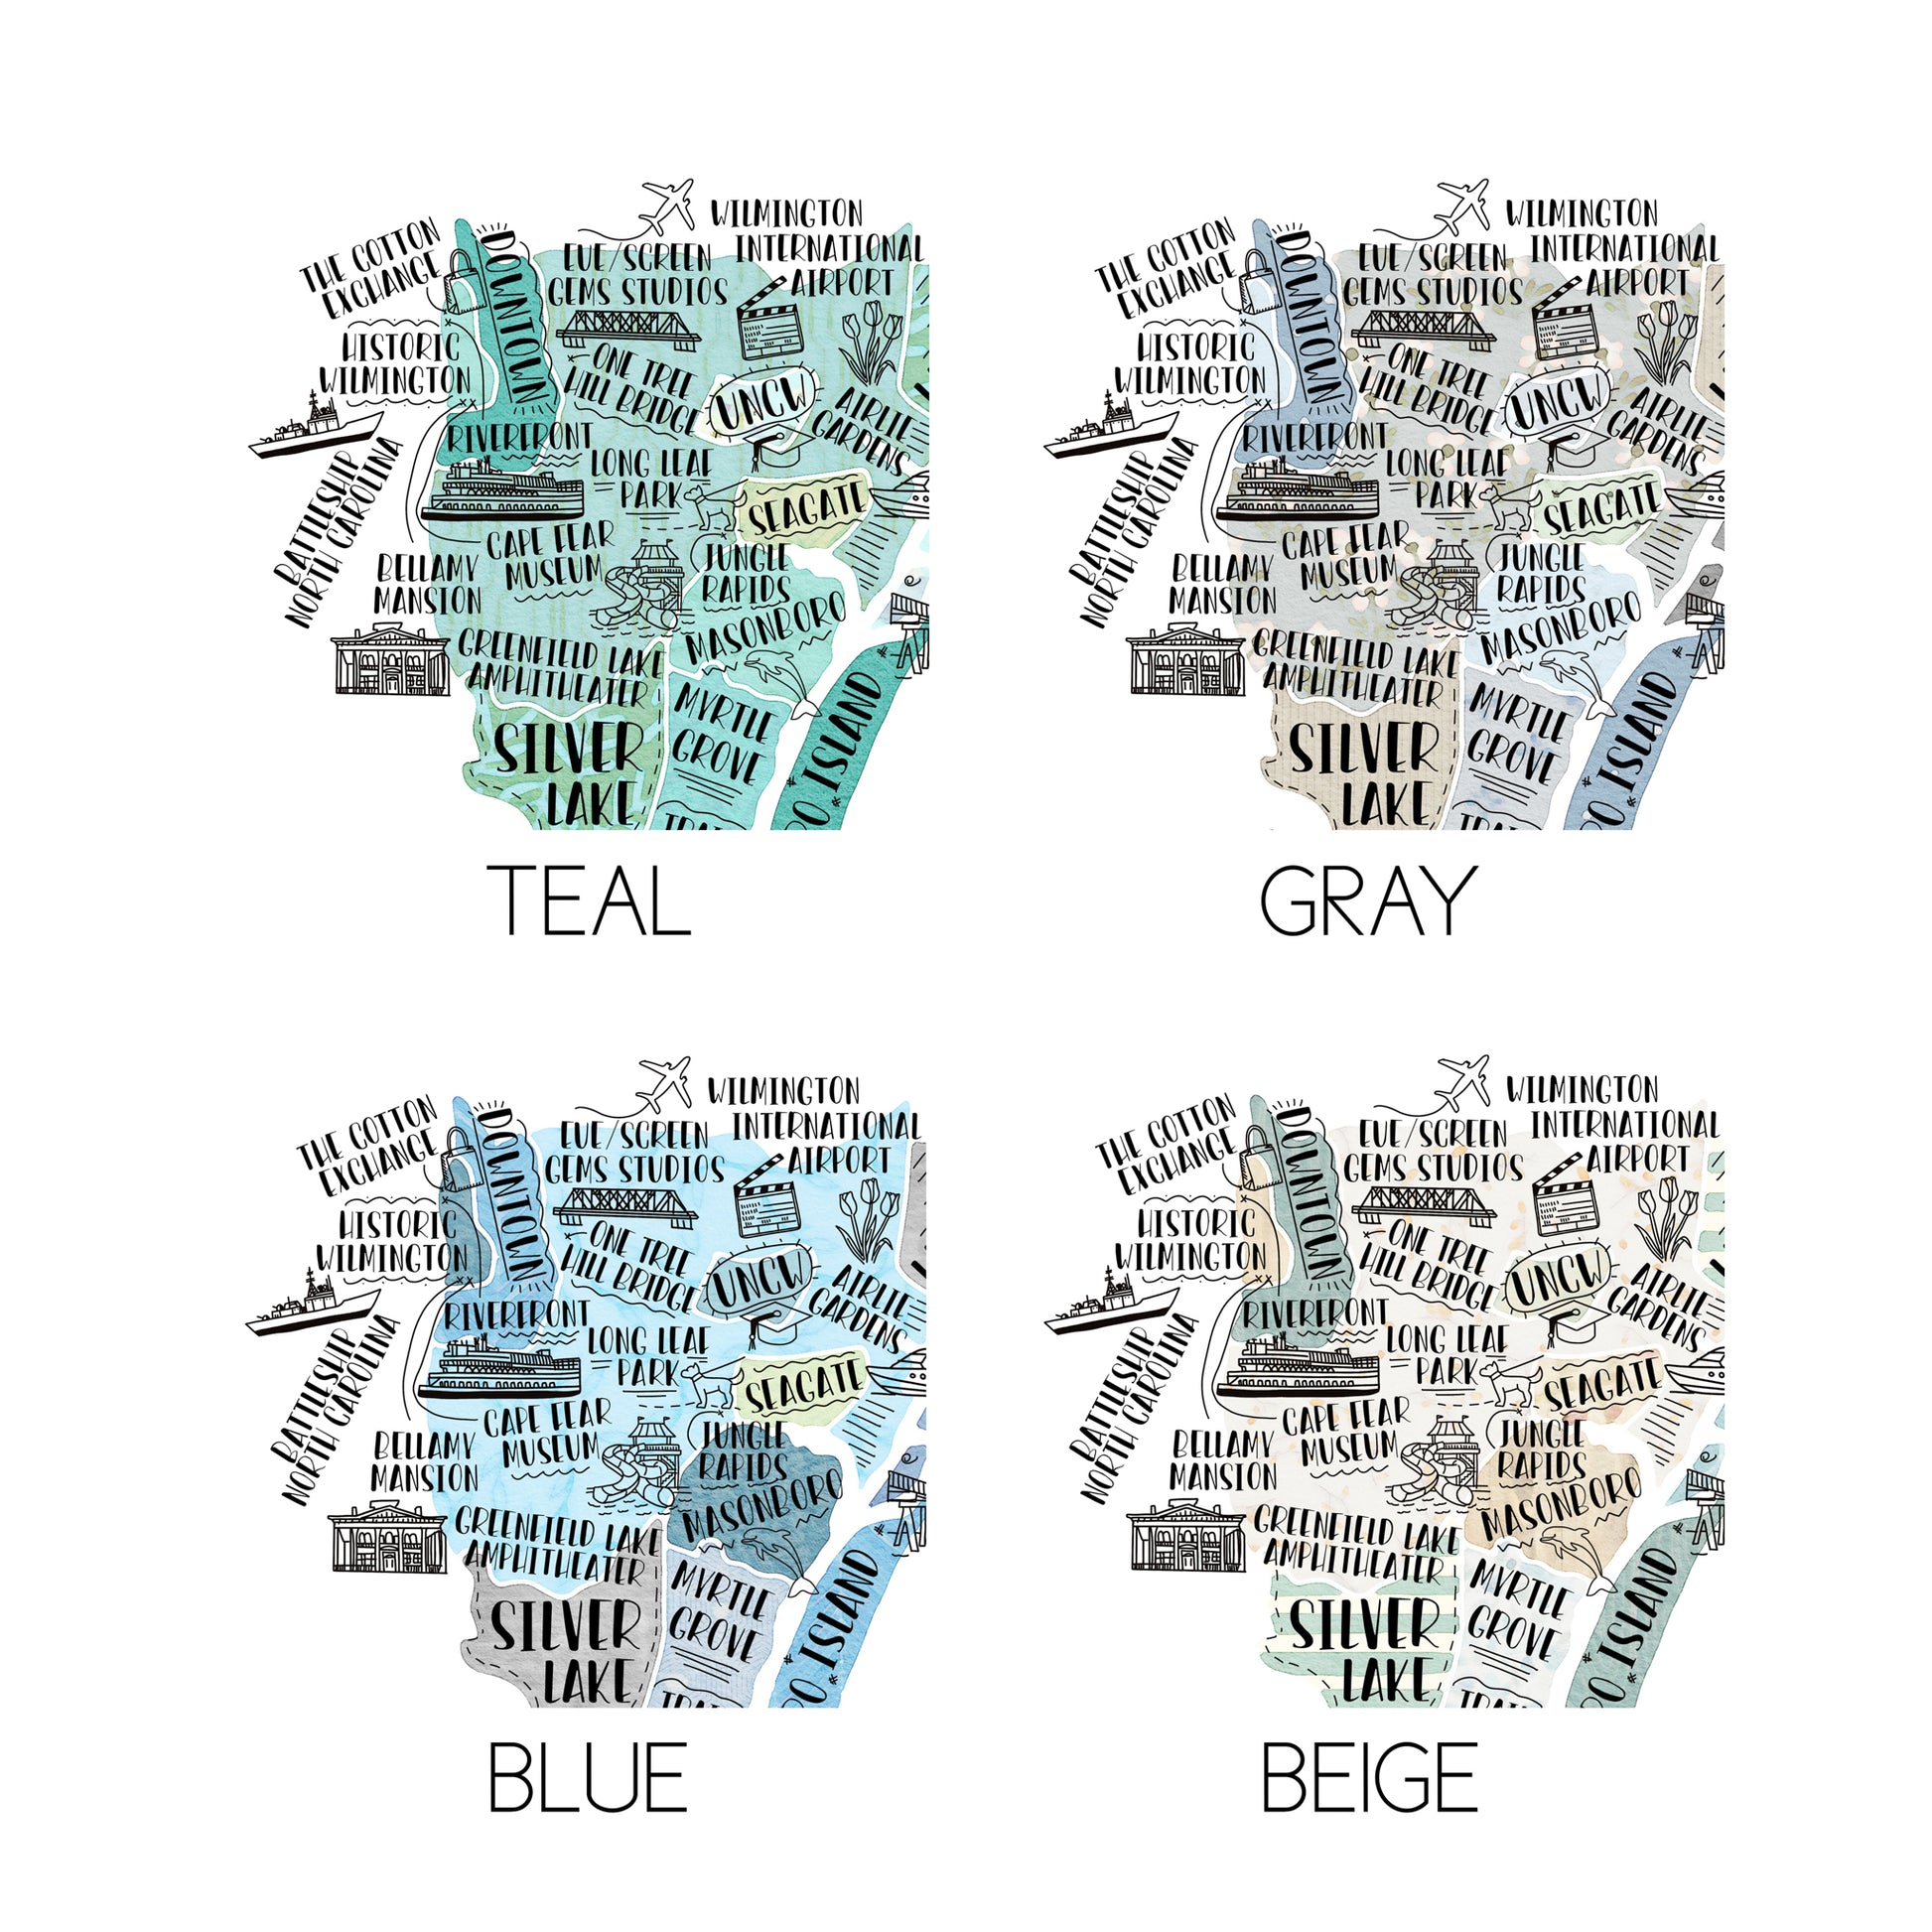 Examples of all four colors available for hand drawn maps: teal, gray, blue, and beige